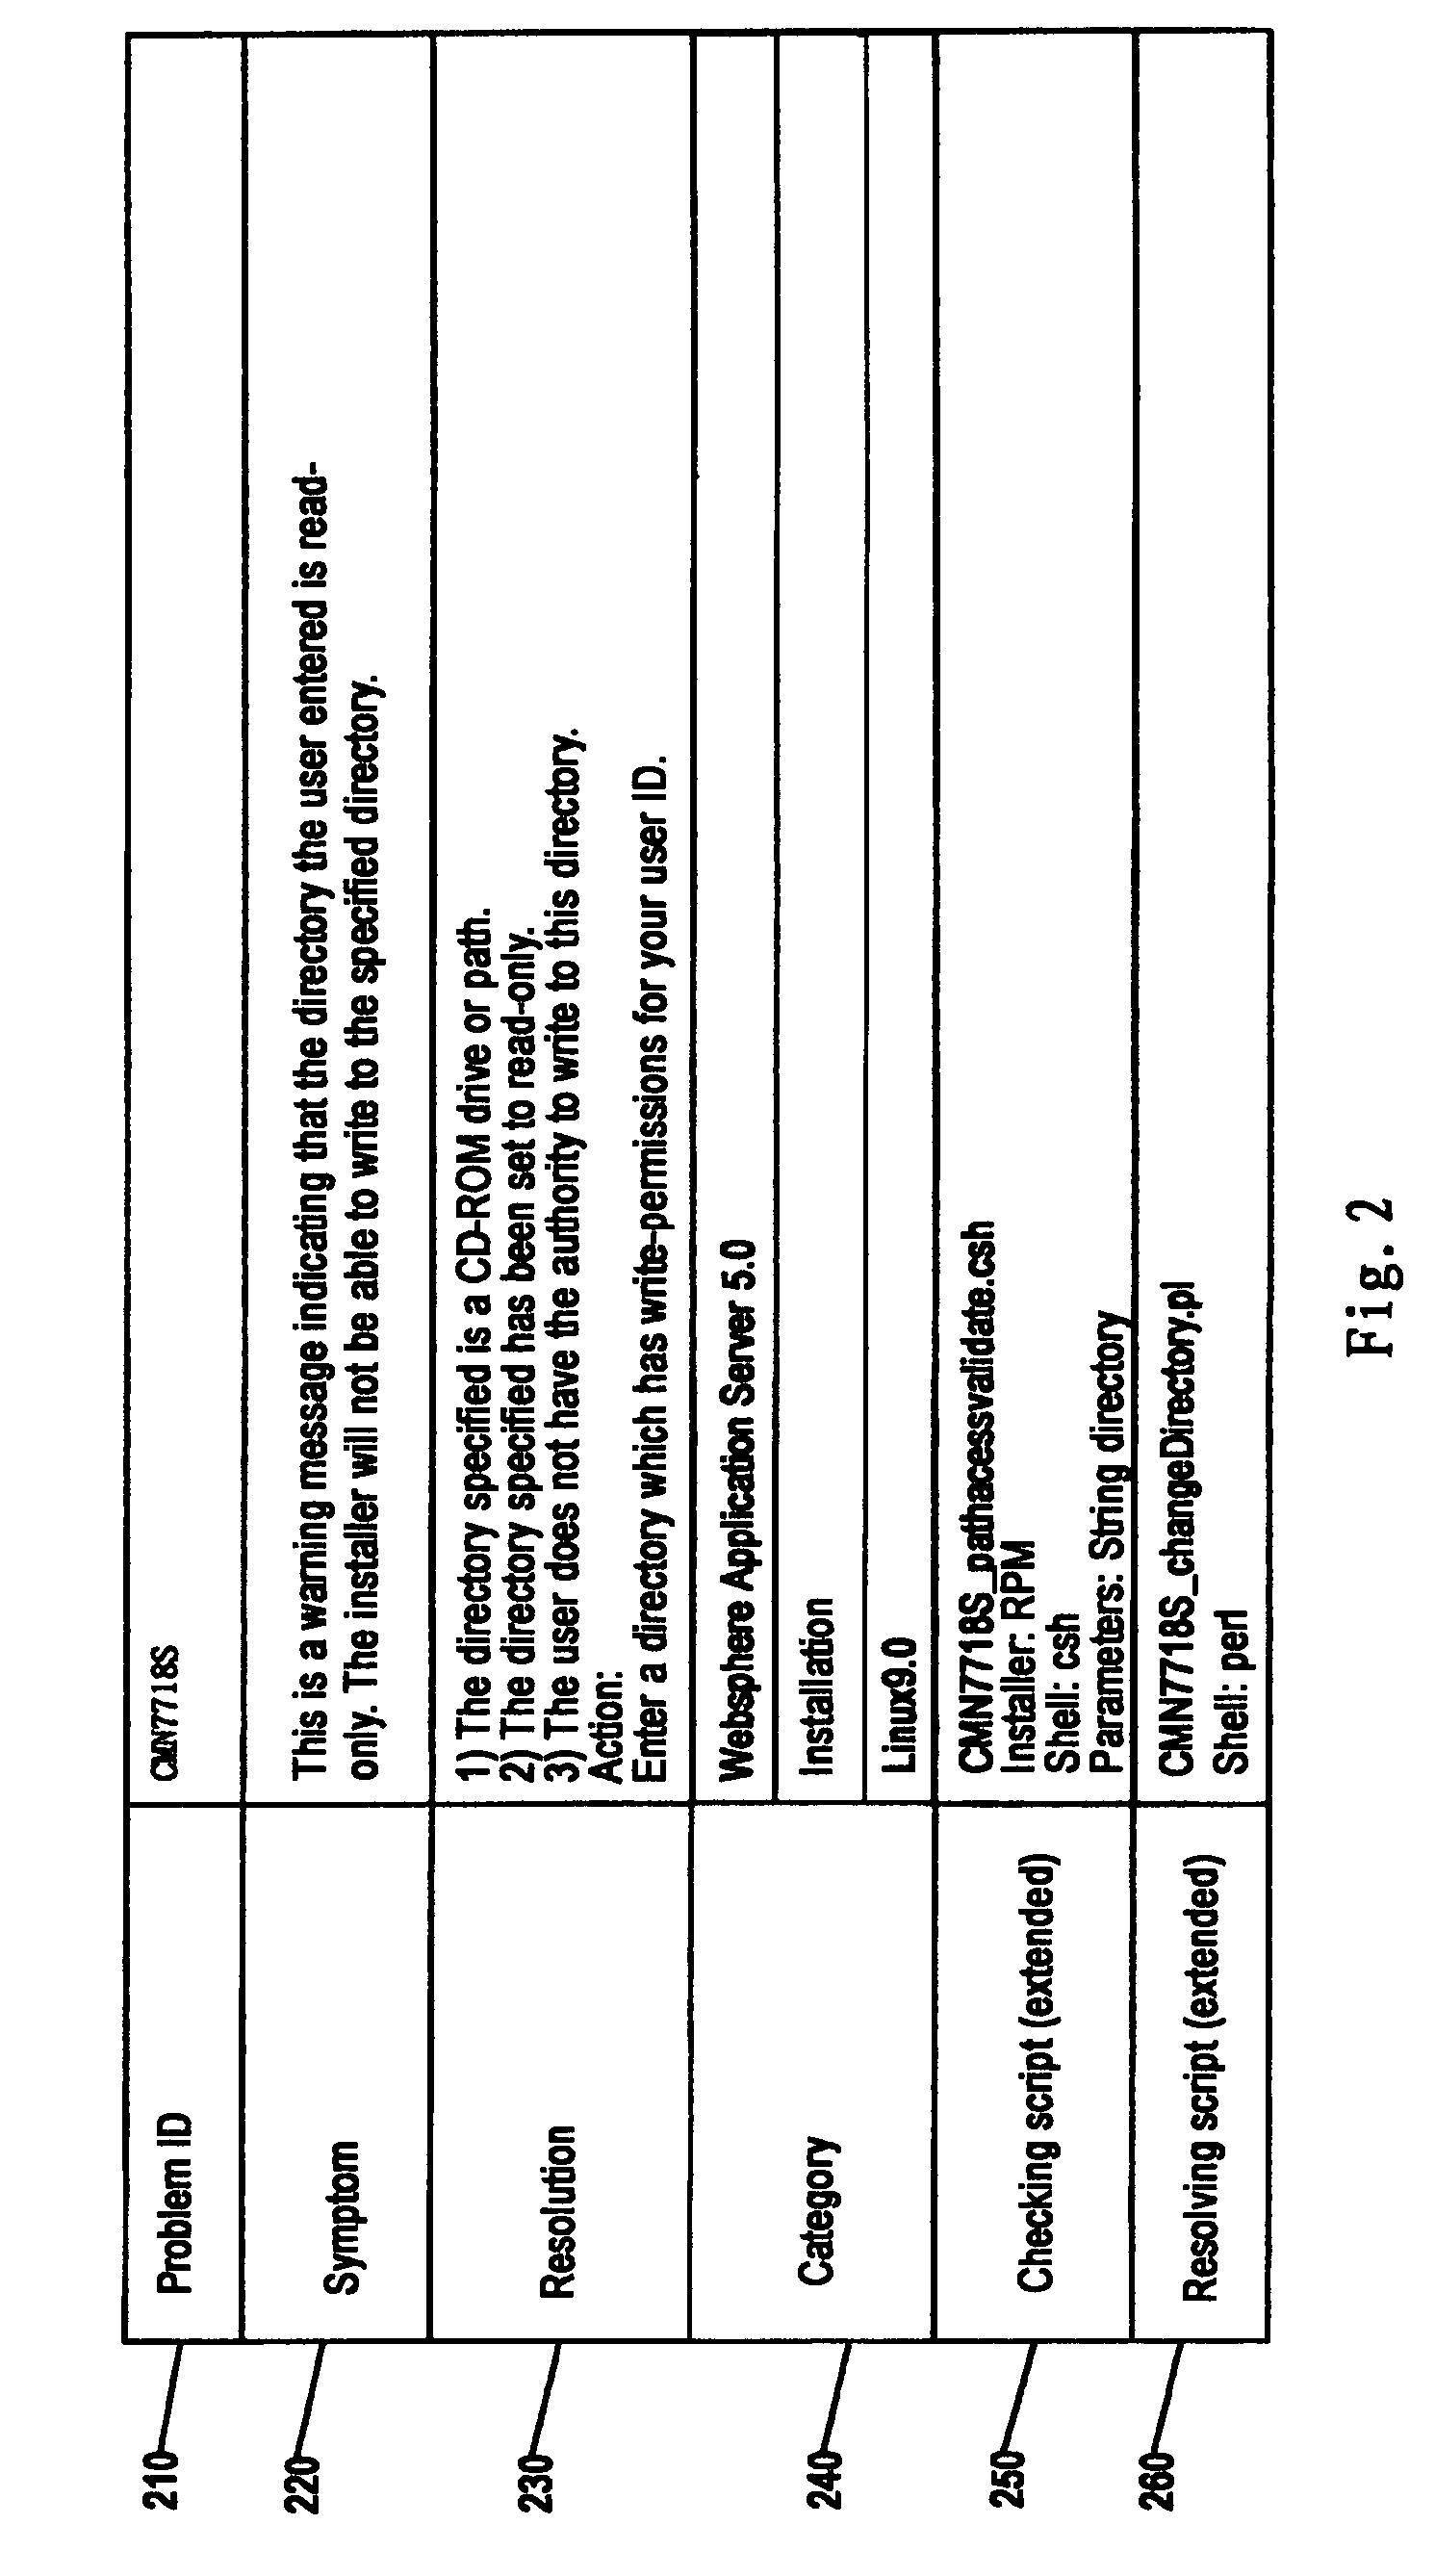 System and method for facilitating installing software